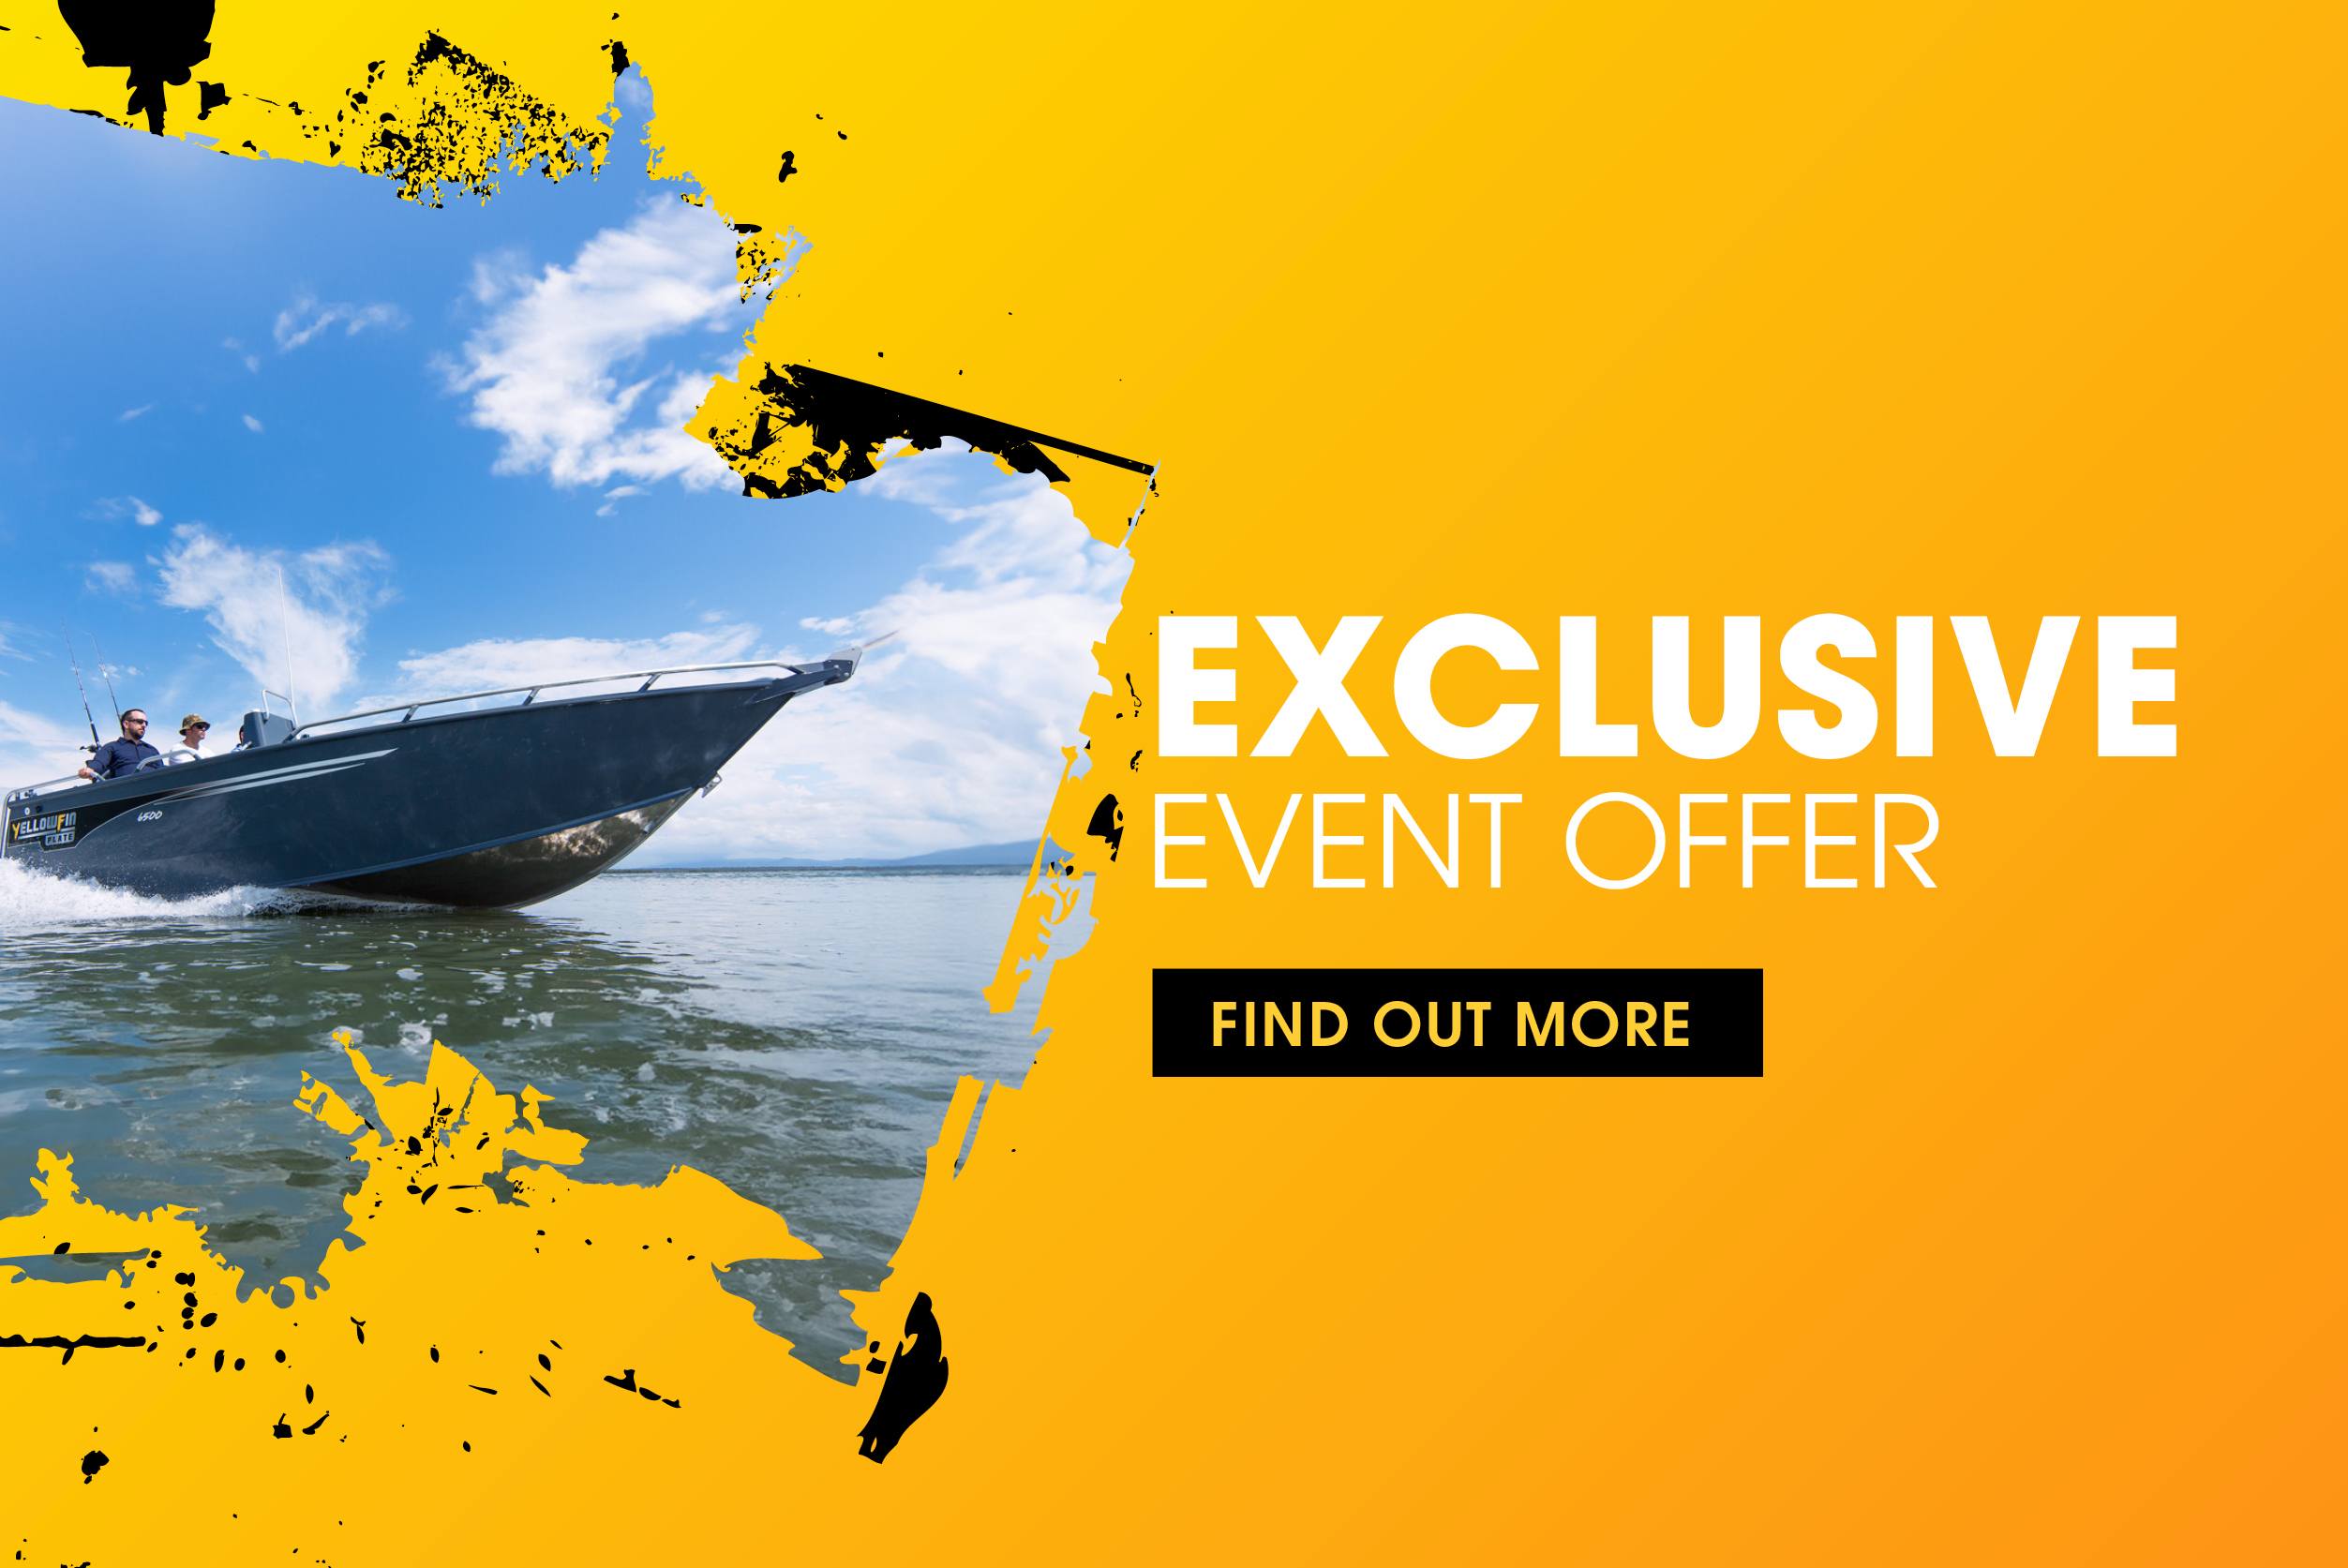 Yellowfin exclusive event offer banner